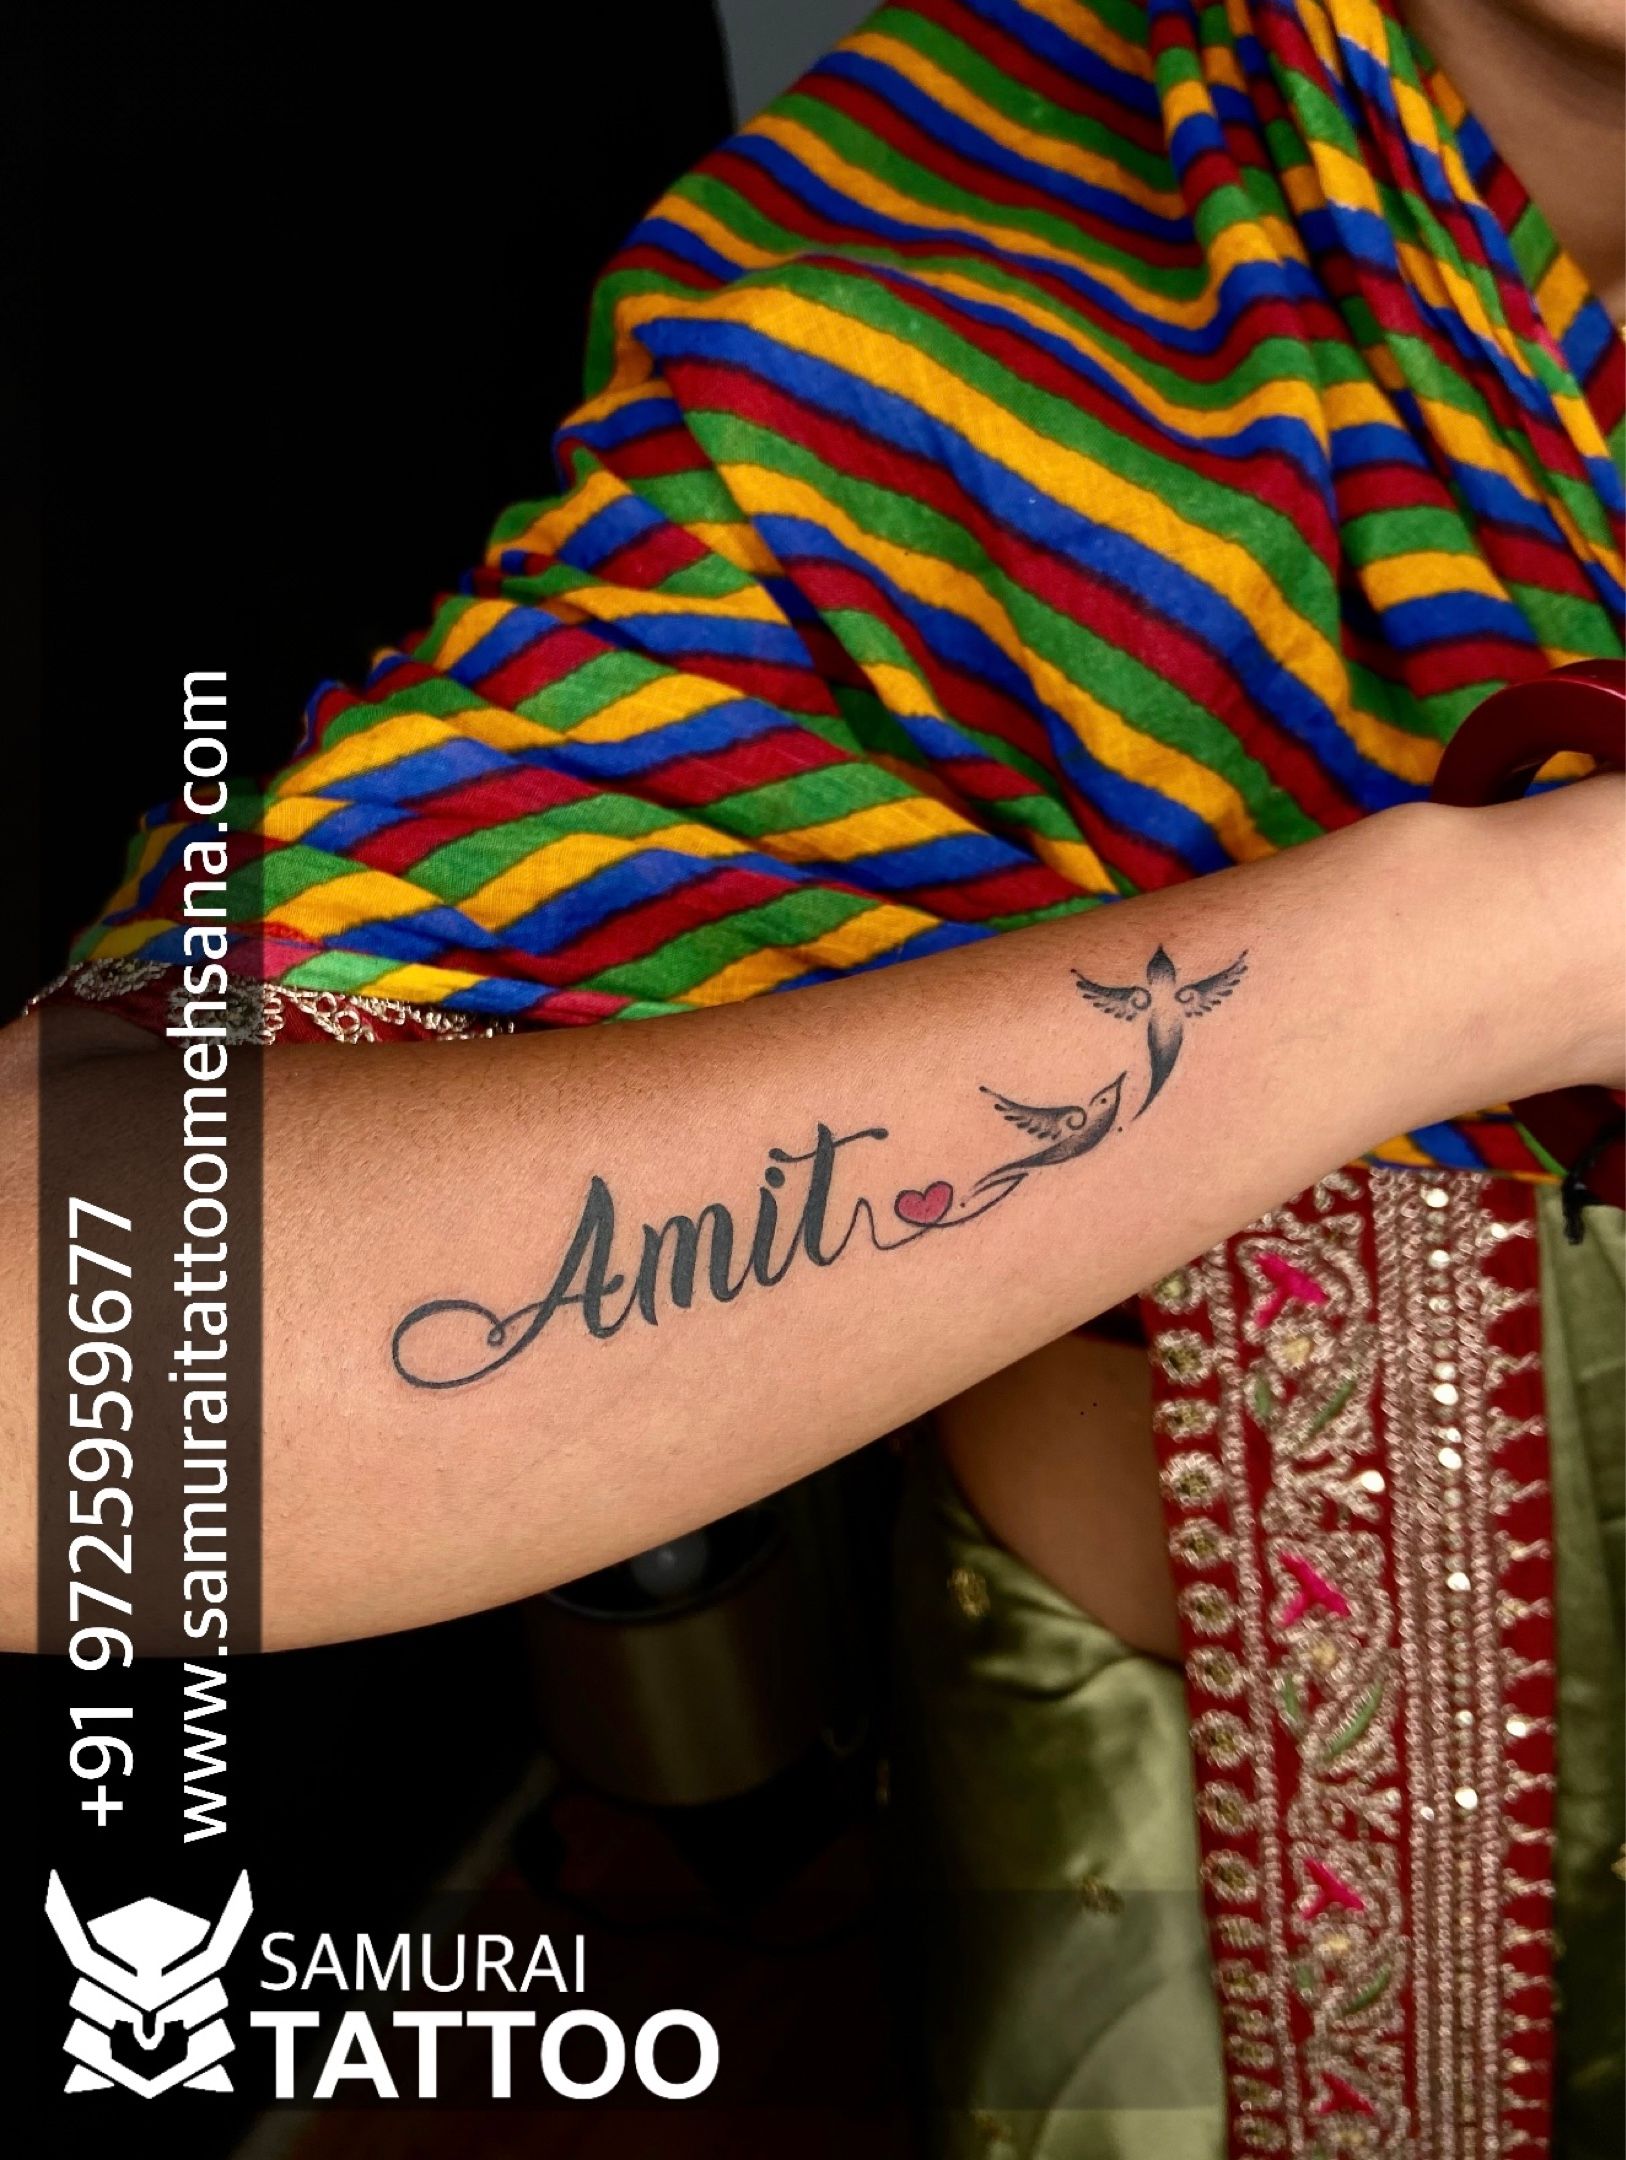 Avinash Chander on LinkedIn: A Quick Guide to Tattoo Styles